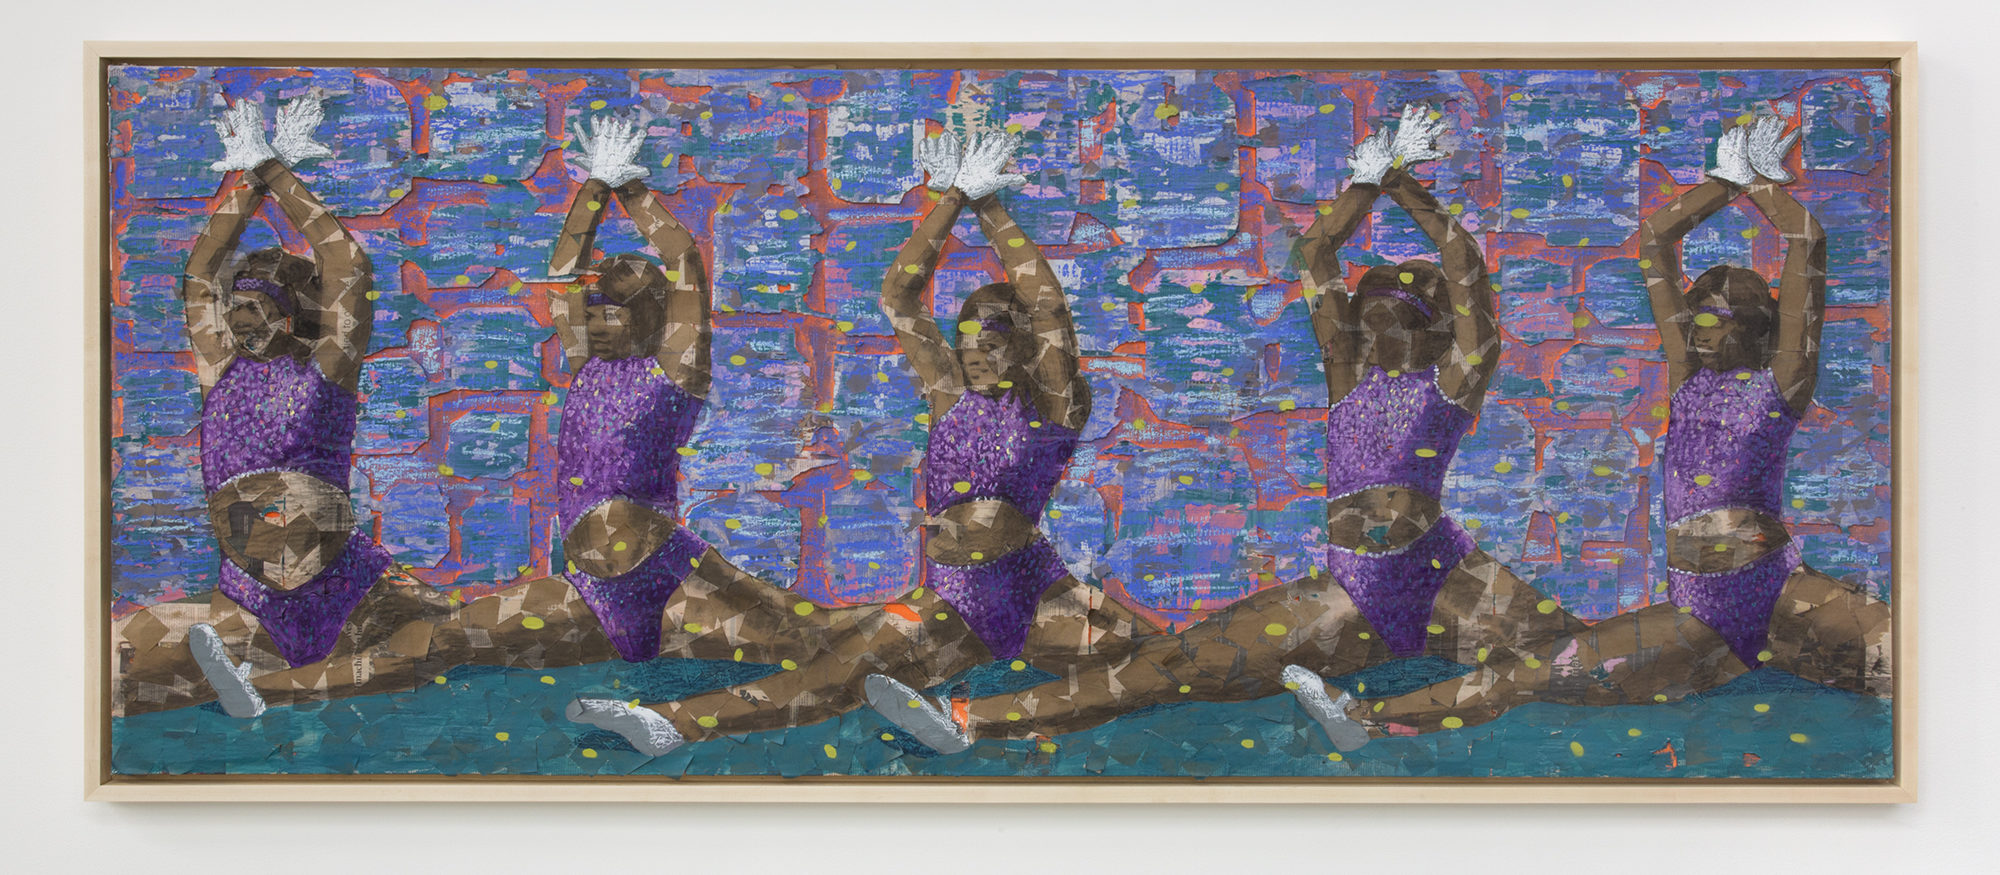 A painting of five nearly identical athletes doing splits. They are wearing skin-tight purple clothing, white gloves and white shoes. Yellow specks dot the canvas, which is a combination of blues, greens, pinks and purples.